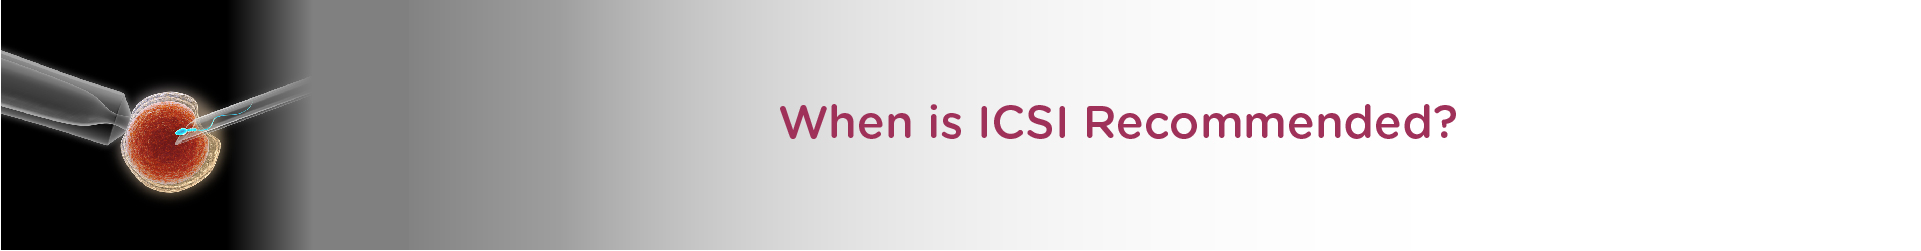 When is ICSI Recommended?